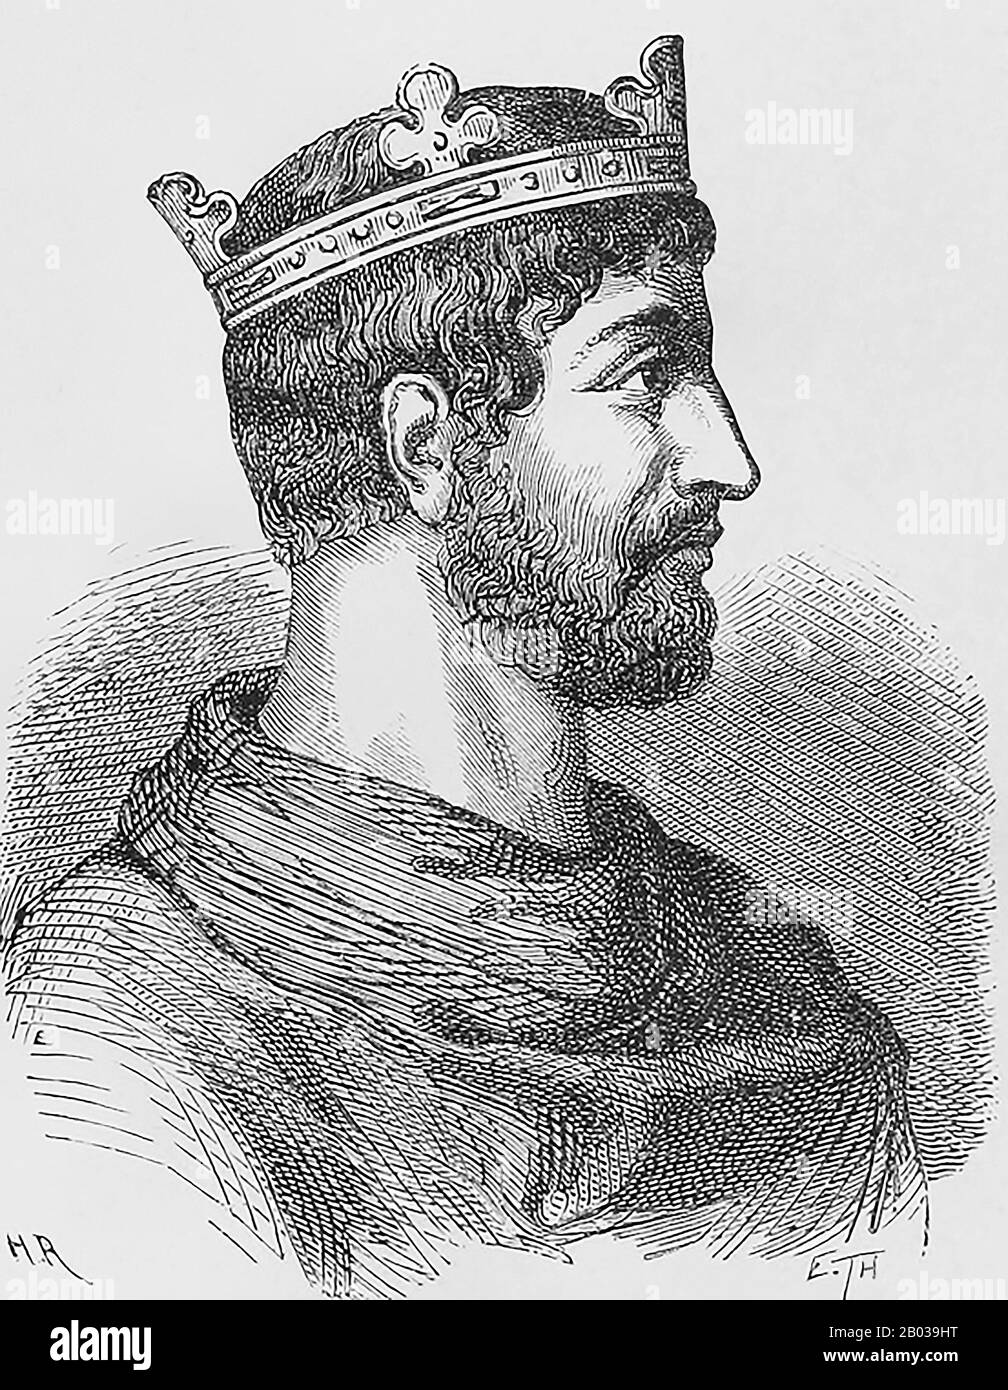 Lothair I (795-855), also known as Lothar I, was the eldest son of Emperor Louis the Pious and grew up in the court of his grandfather, Emperor Charlemagne. When Louis became sole emperor in 814, he sent Lothair to govern Bavaria in 815. Lothair was crowned as co-emperor and declared as principal heir in 817, and would be overlord to his younger brothers, Pippin of Aquitaine and Louis the German, as well as his cousin Bernard of Italy.  When his father died in 840, Lothair ignored all previous plans for partitioning and claimed the whole of the Holy Roman Empire for himself, leading to another Stock Photo